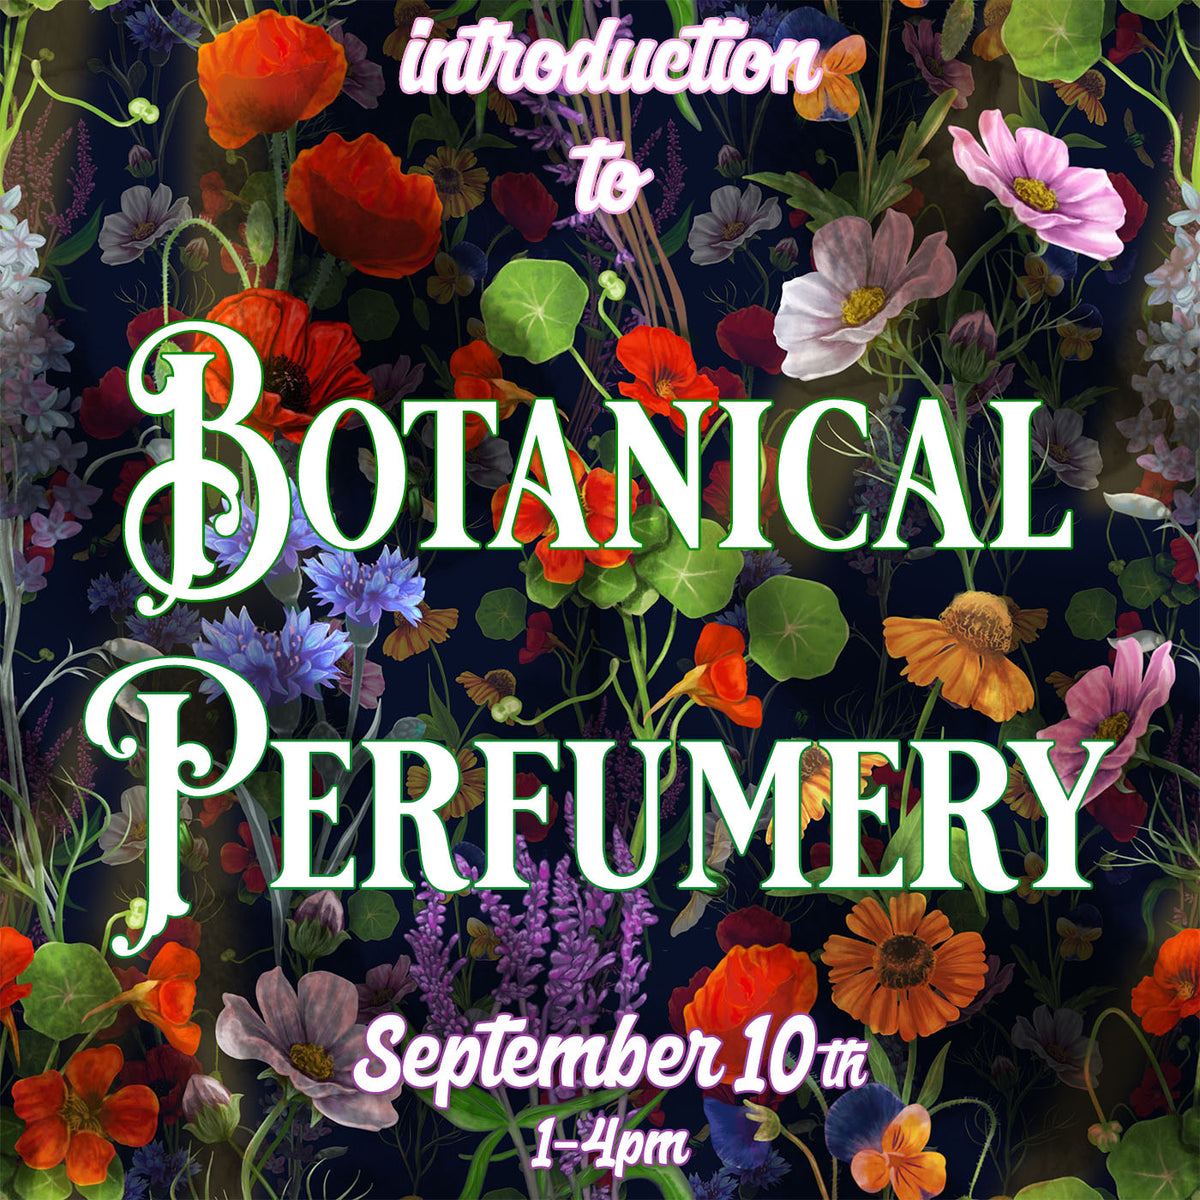 Introduction to Botanical Perfumery September 10th 1:00pm- 4:00pm